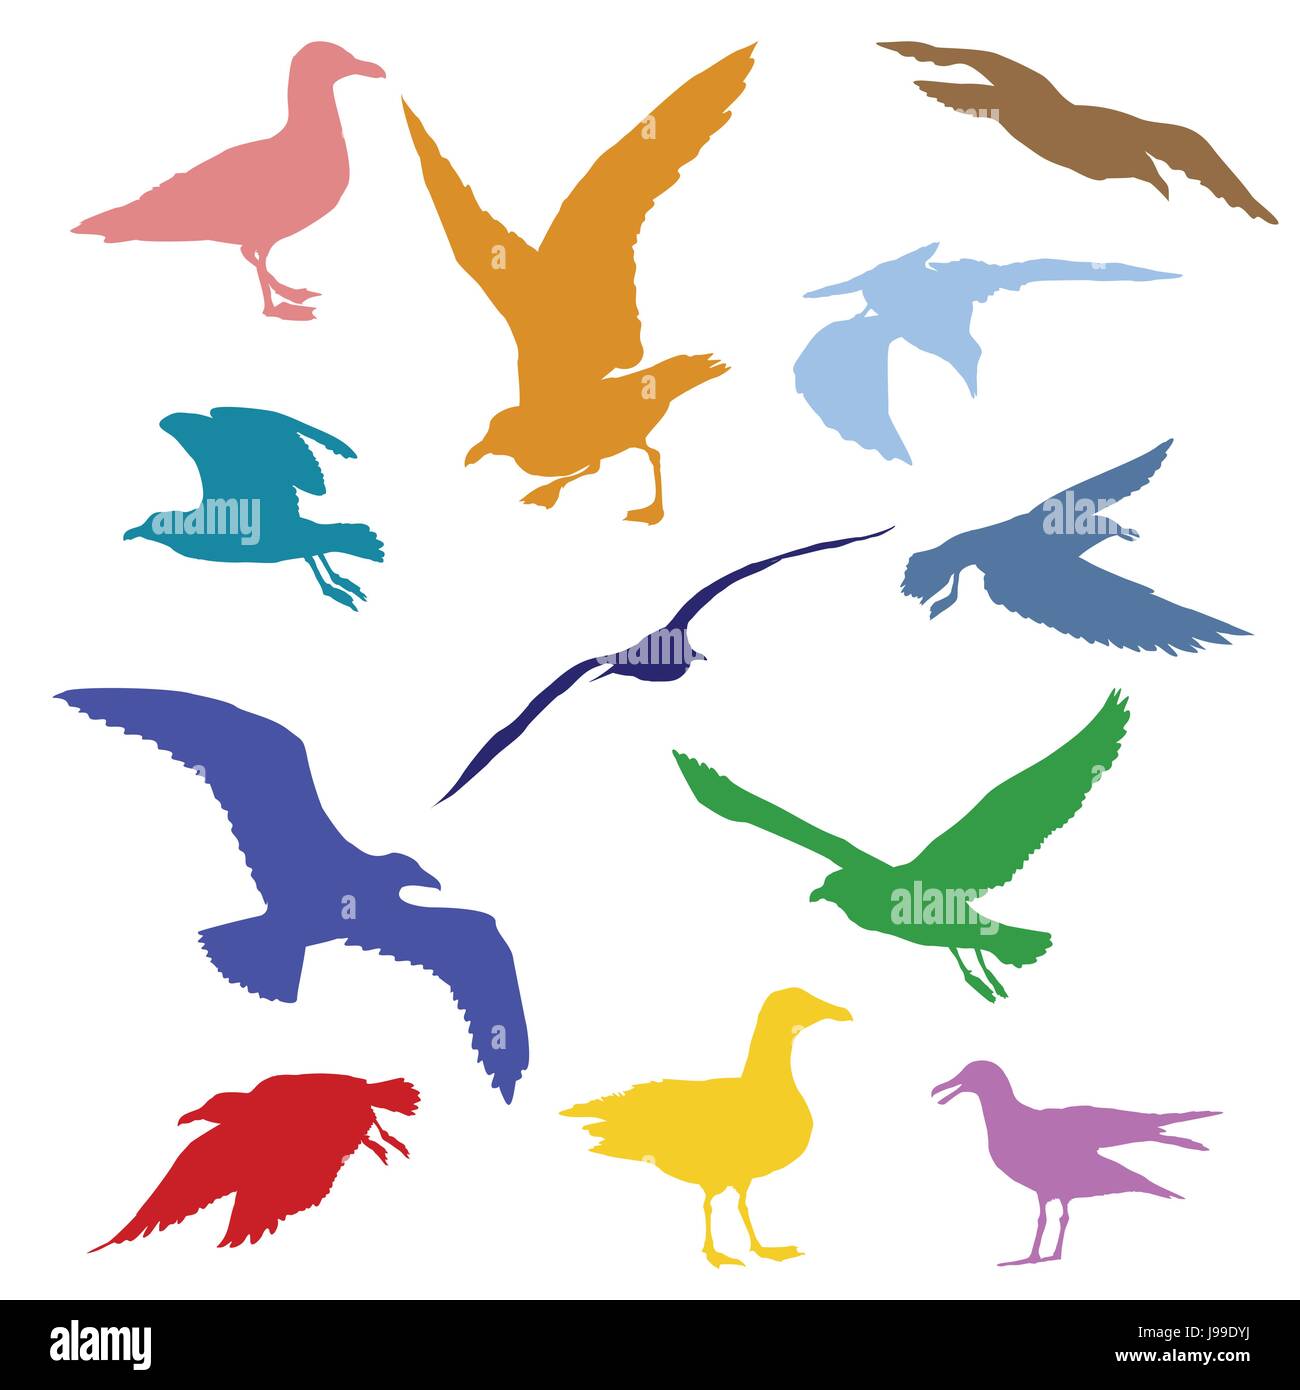 Set of silhouettes of seagulls in different colors isolated on white background Stock Vector